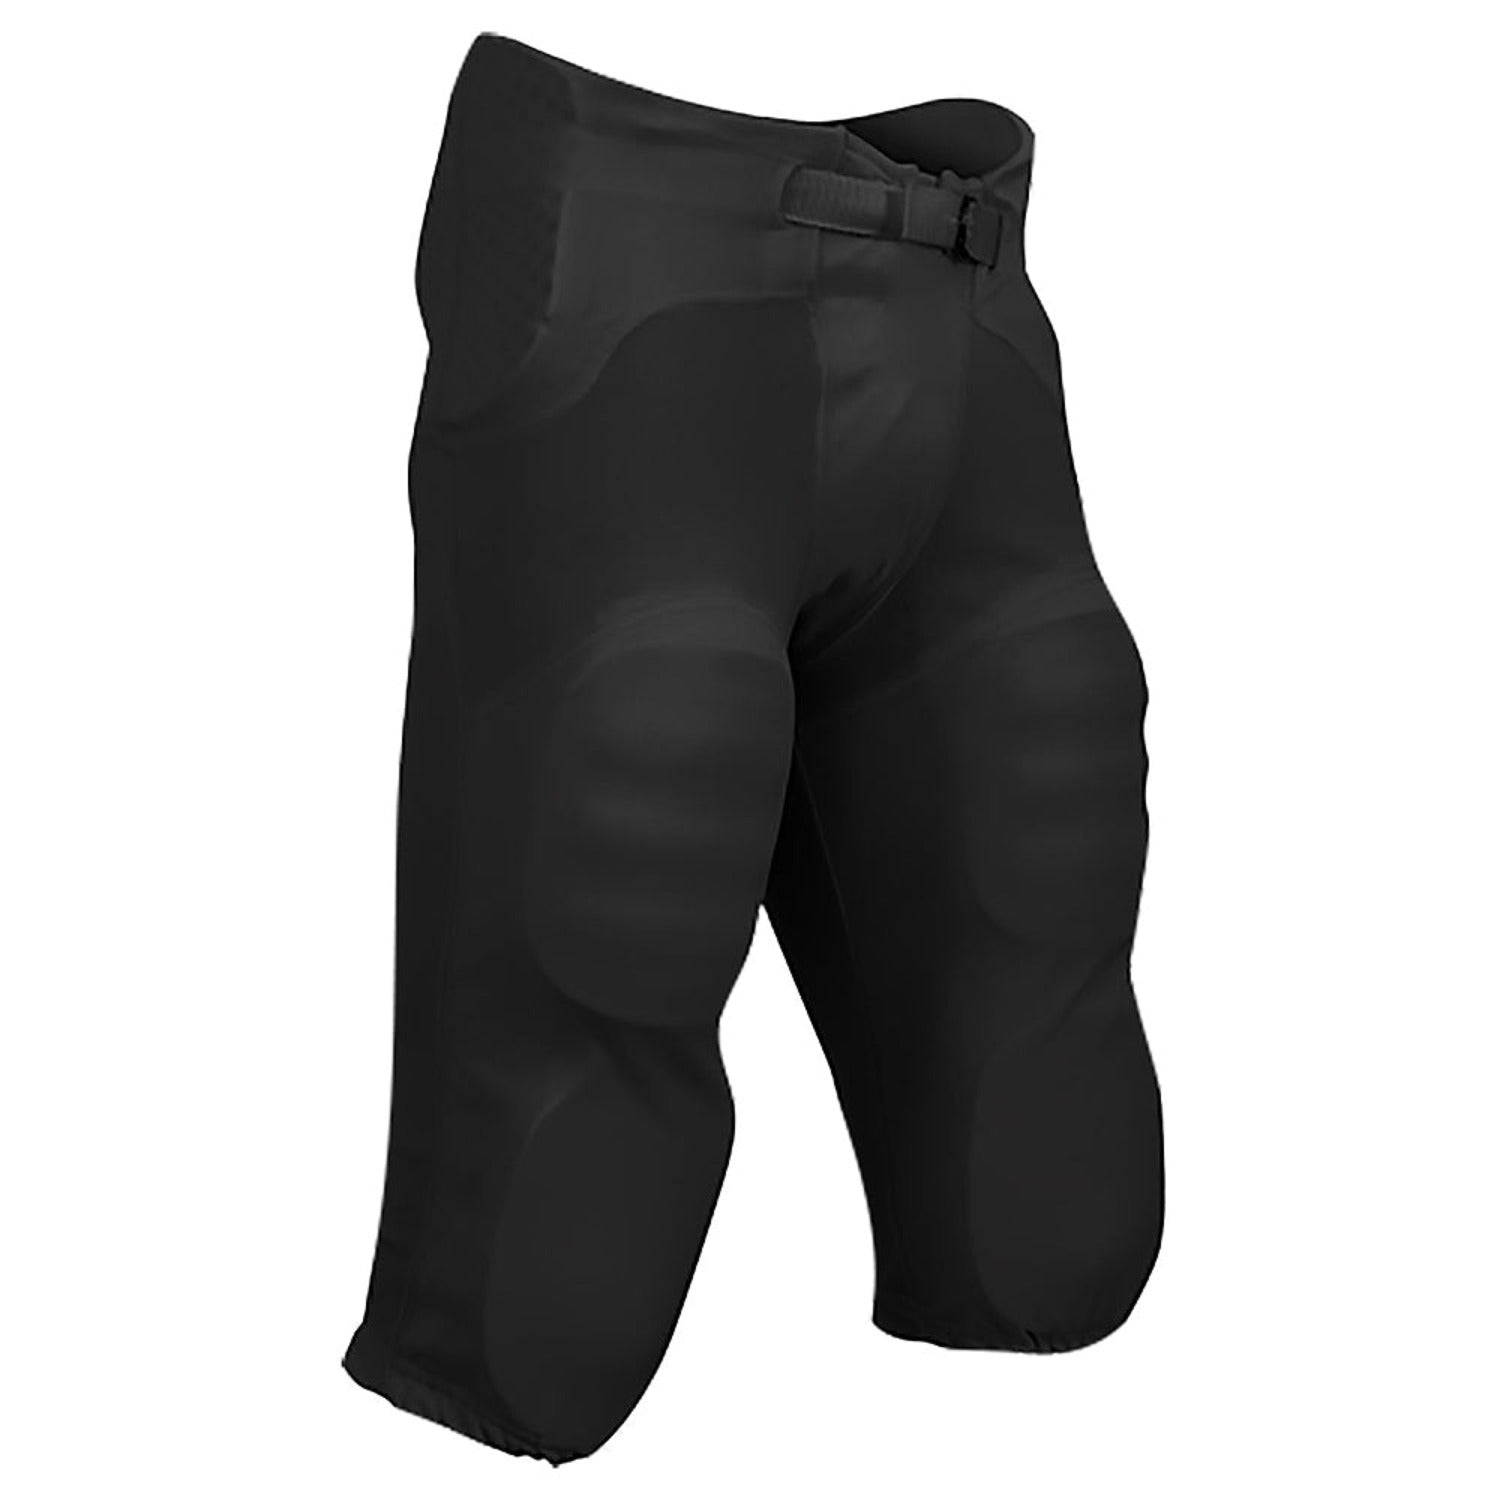 Champro Men's Safety Practice Football Pants with Built-In Pads - lauxsportinggoods